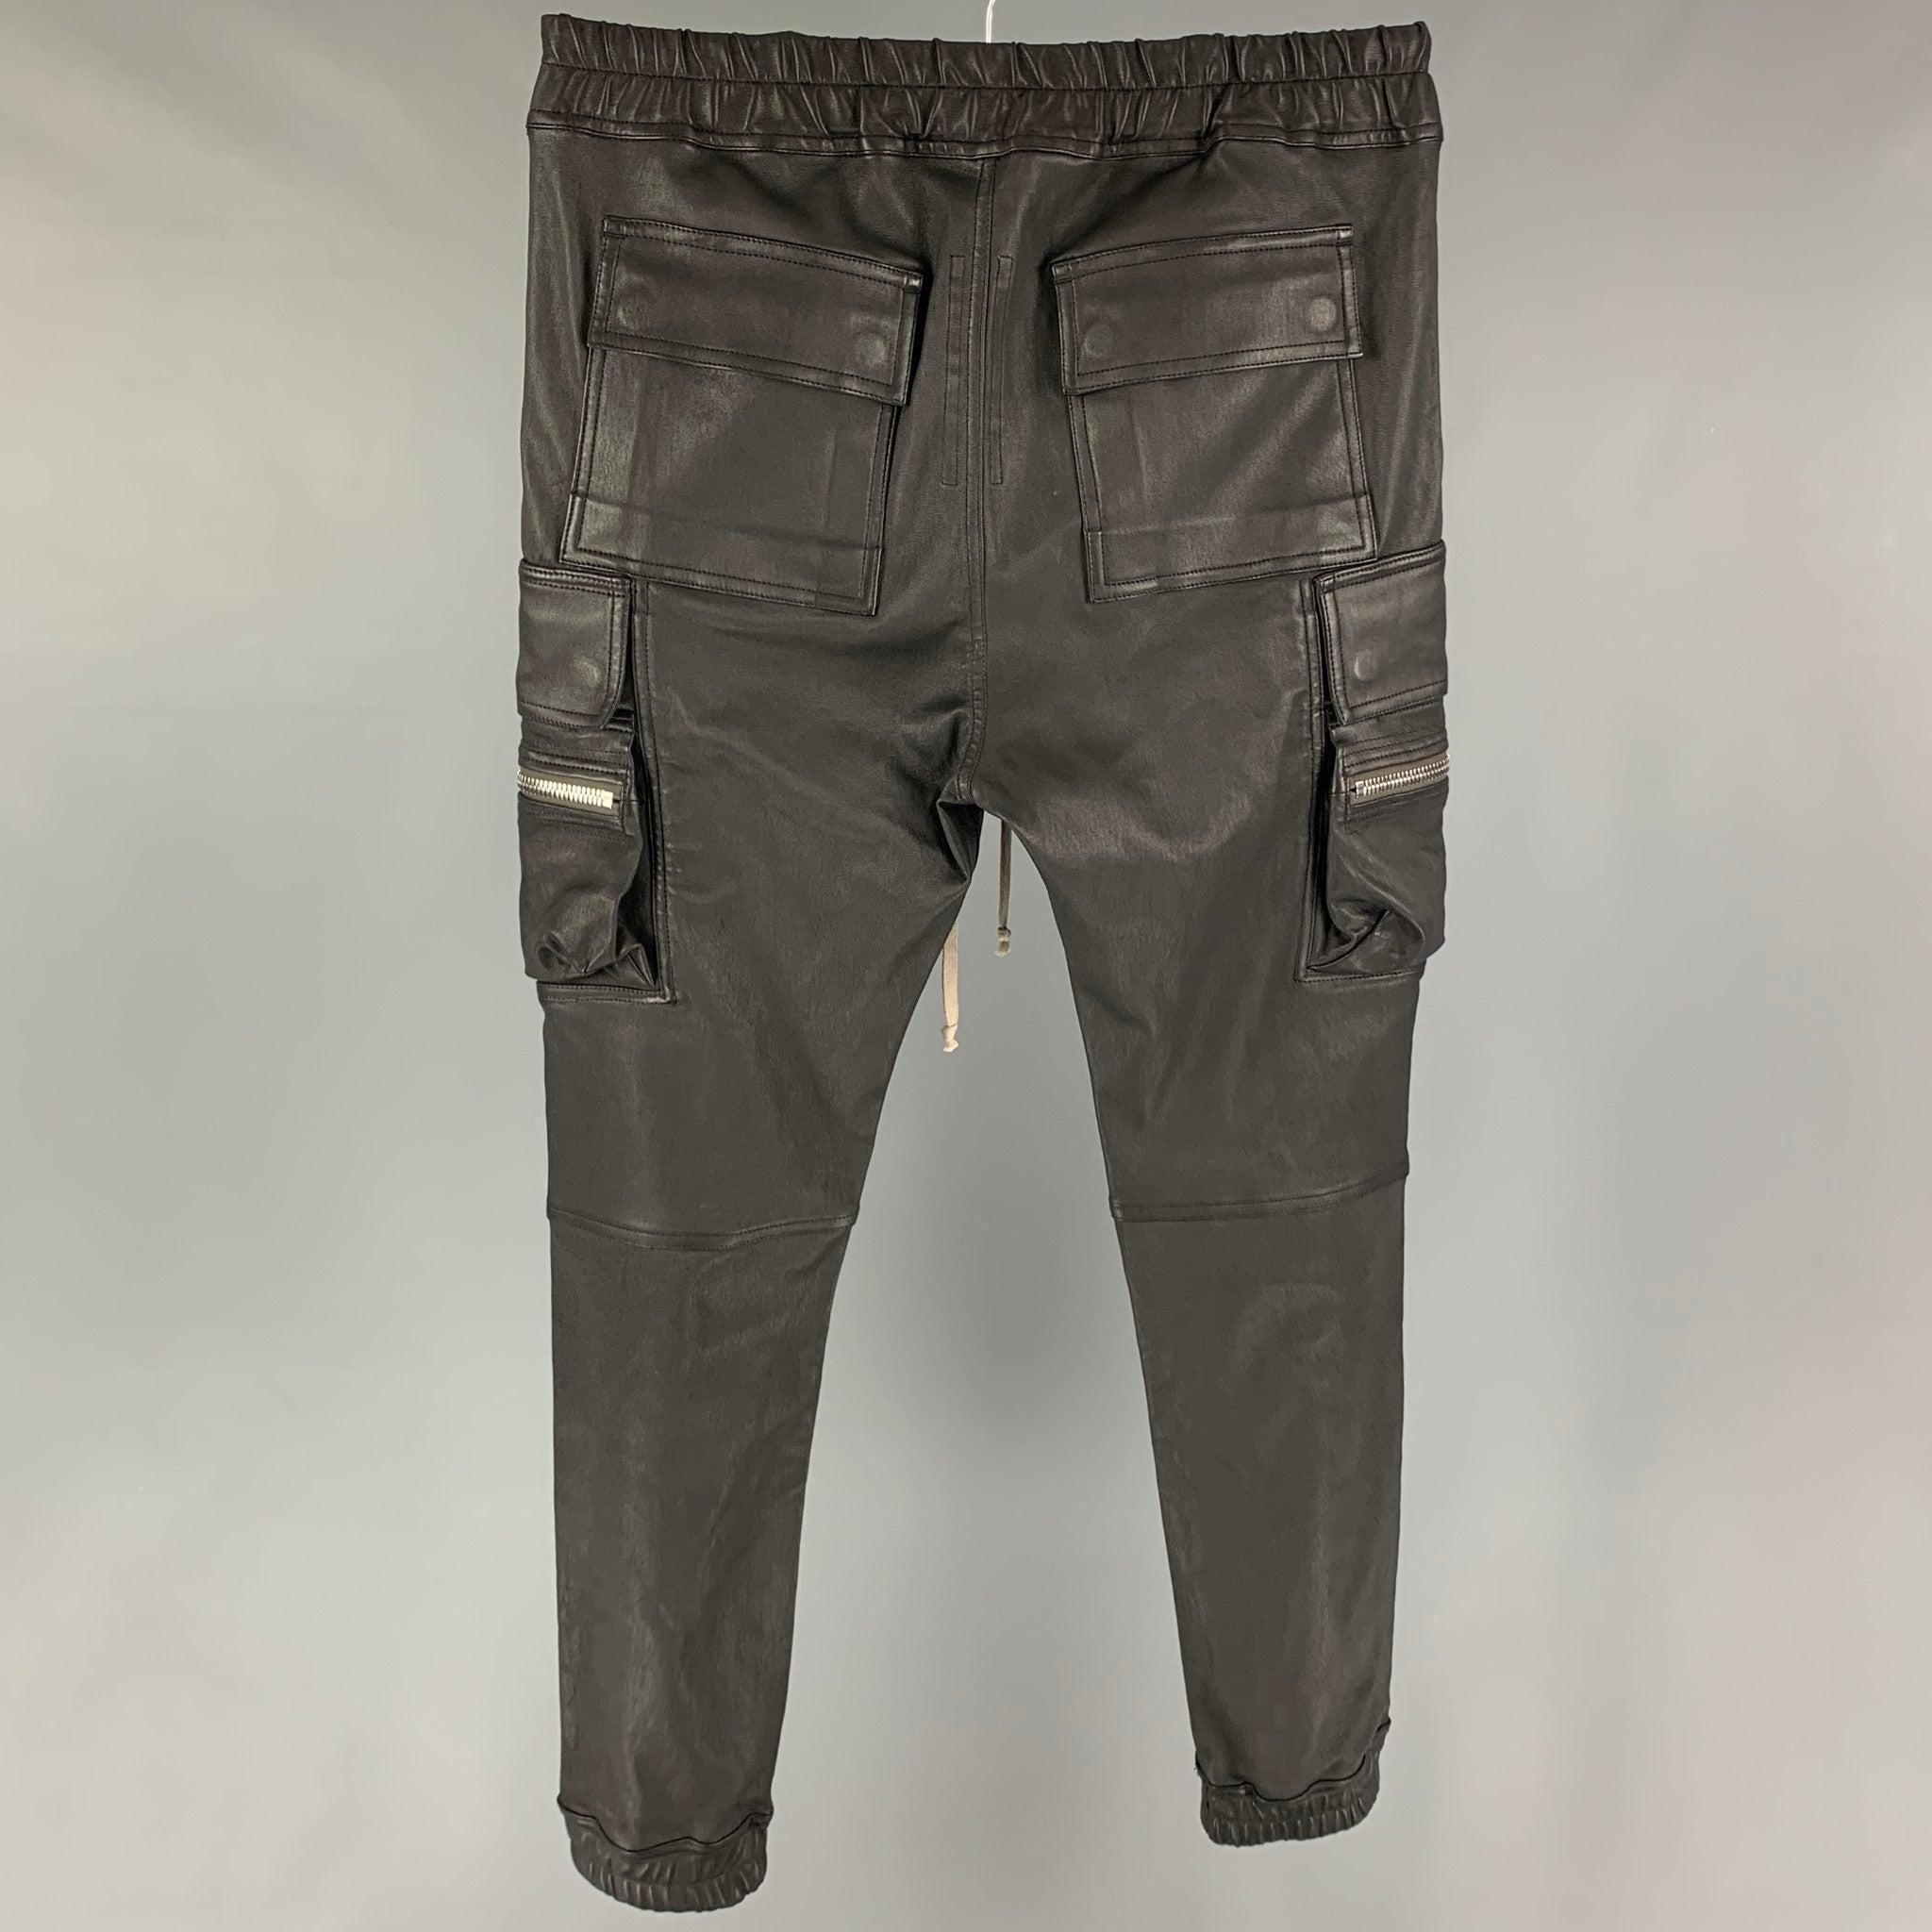 RICK OWENS Gethsemane FW 21 Size 34 Black Leather Mastodon Cargo Pants In Excellent Condition For Sale In San Francisco, CA